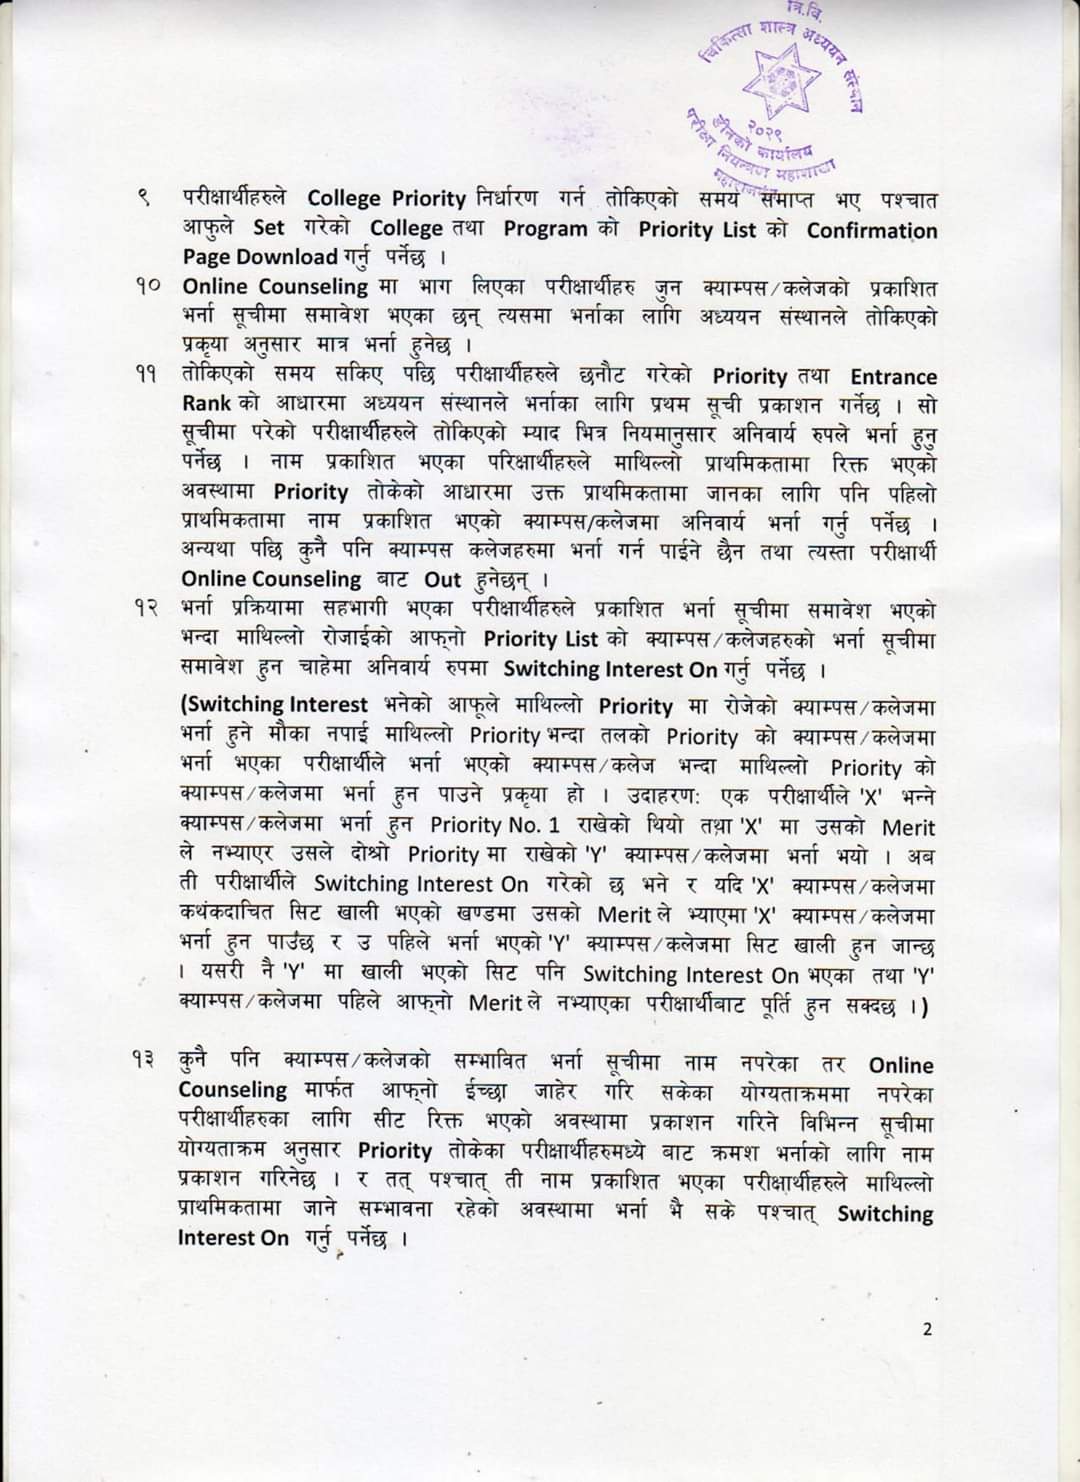 Notice Regarding Online Counseling of Bachelor Entrance Examination 2076/077 (2019) for Nepalese Candidates